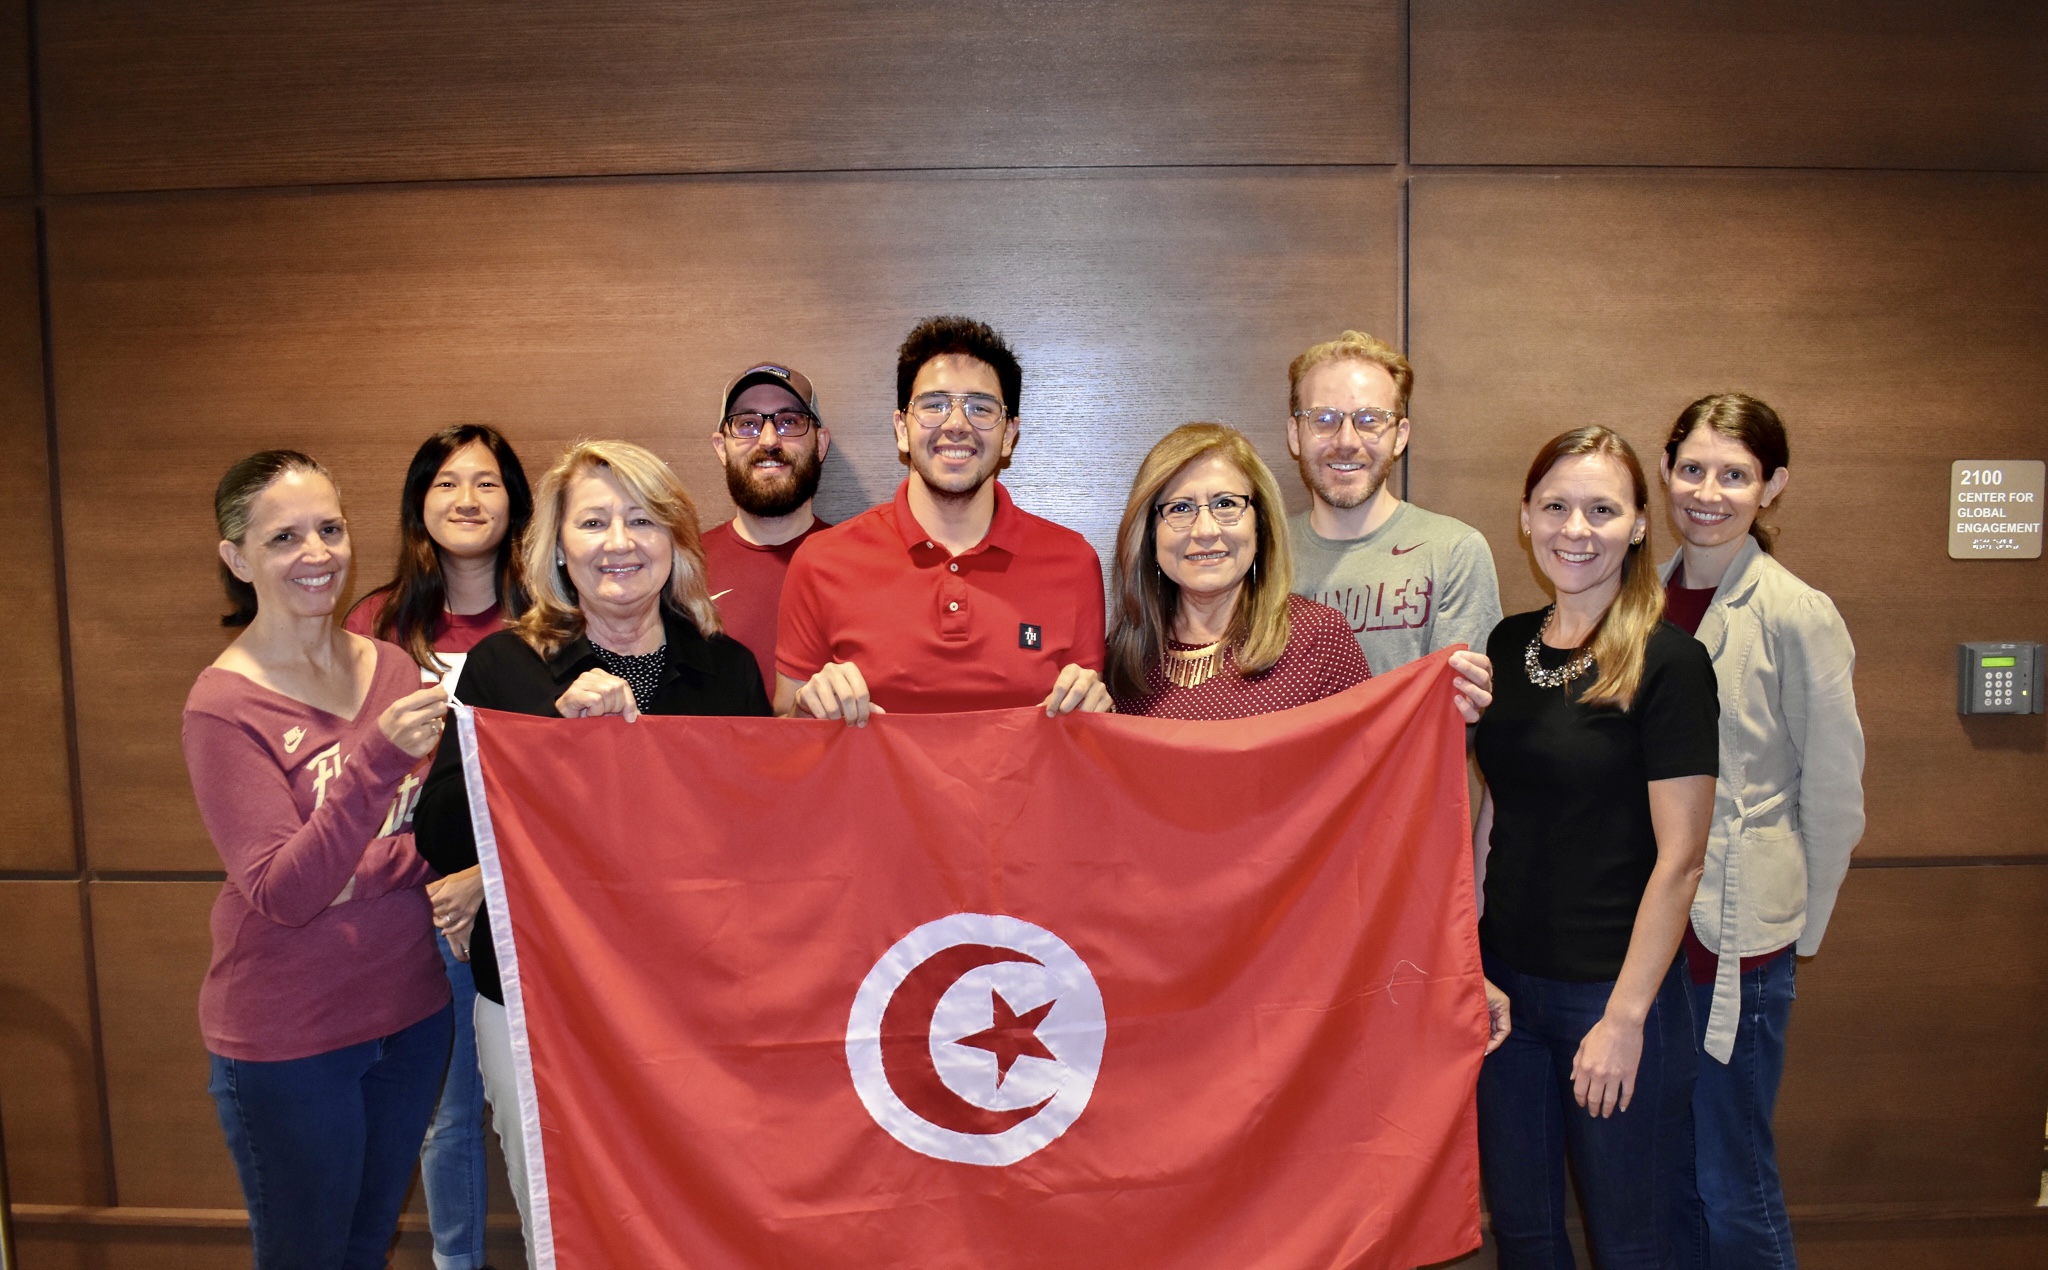 Bechir holding the flag of Tunisia